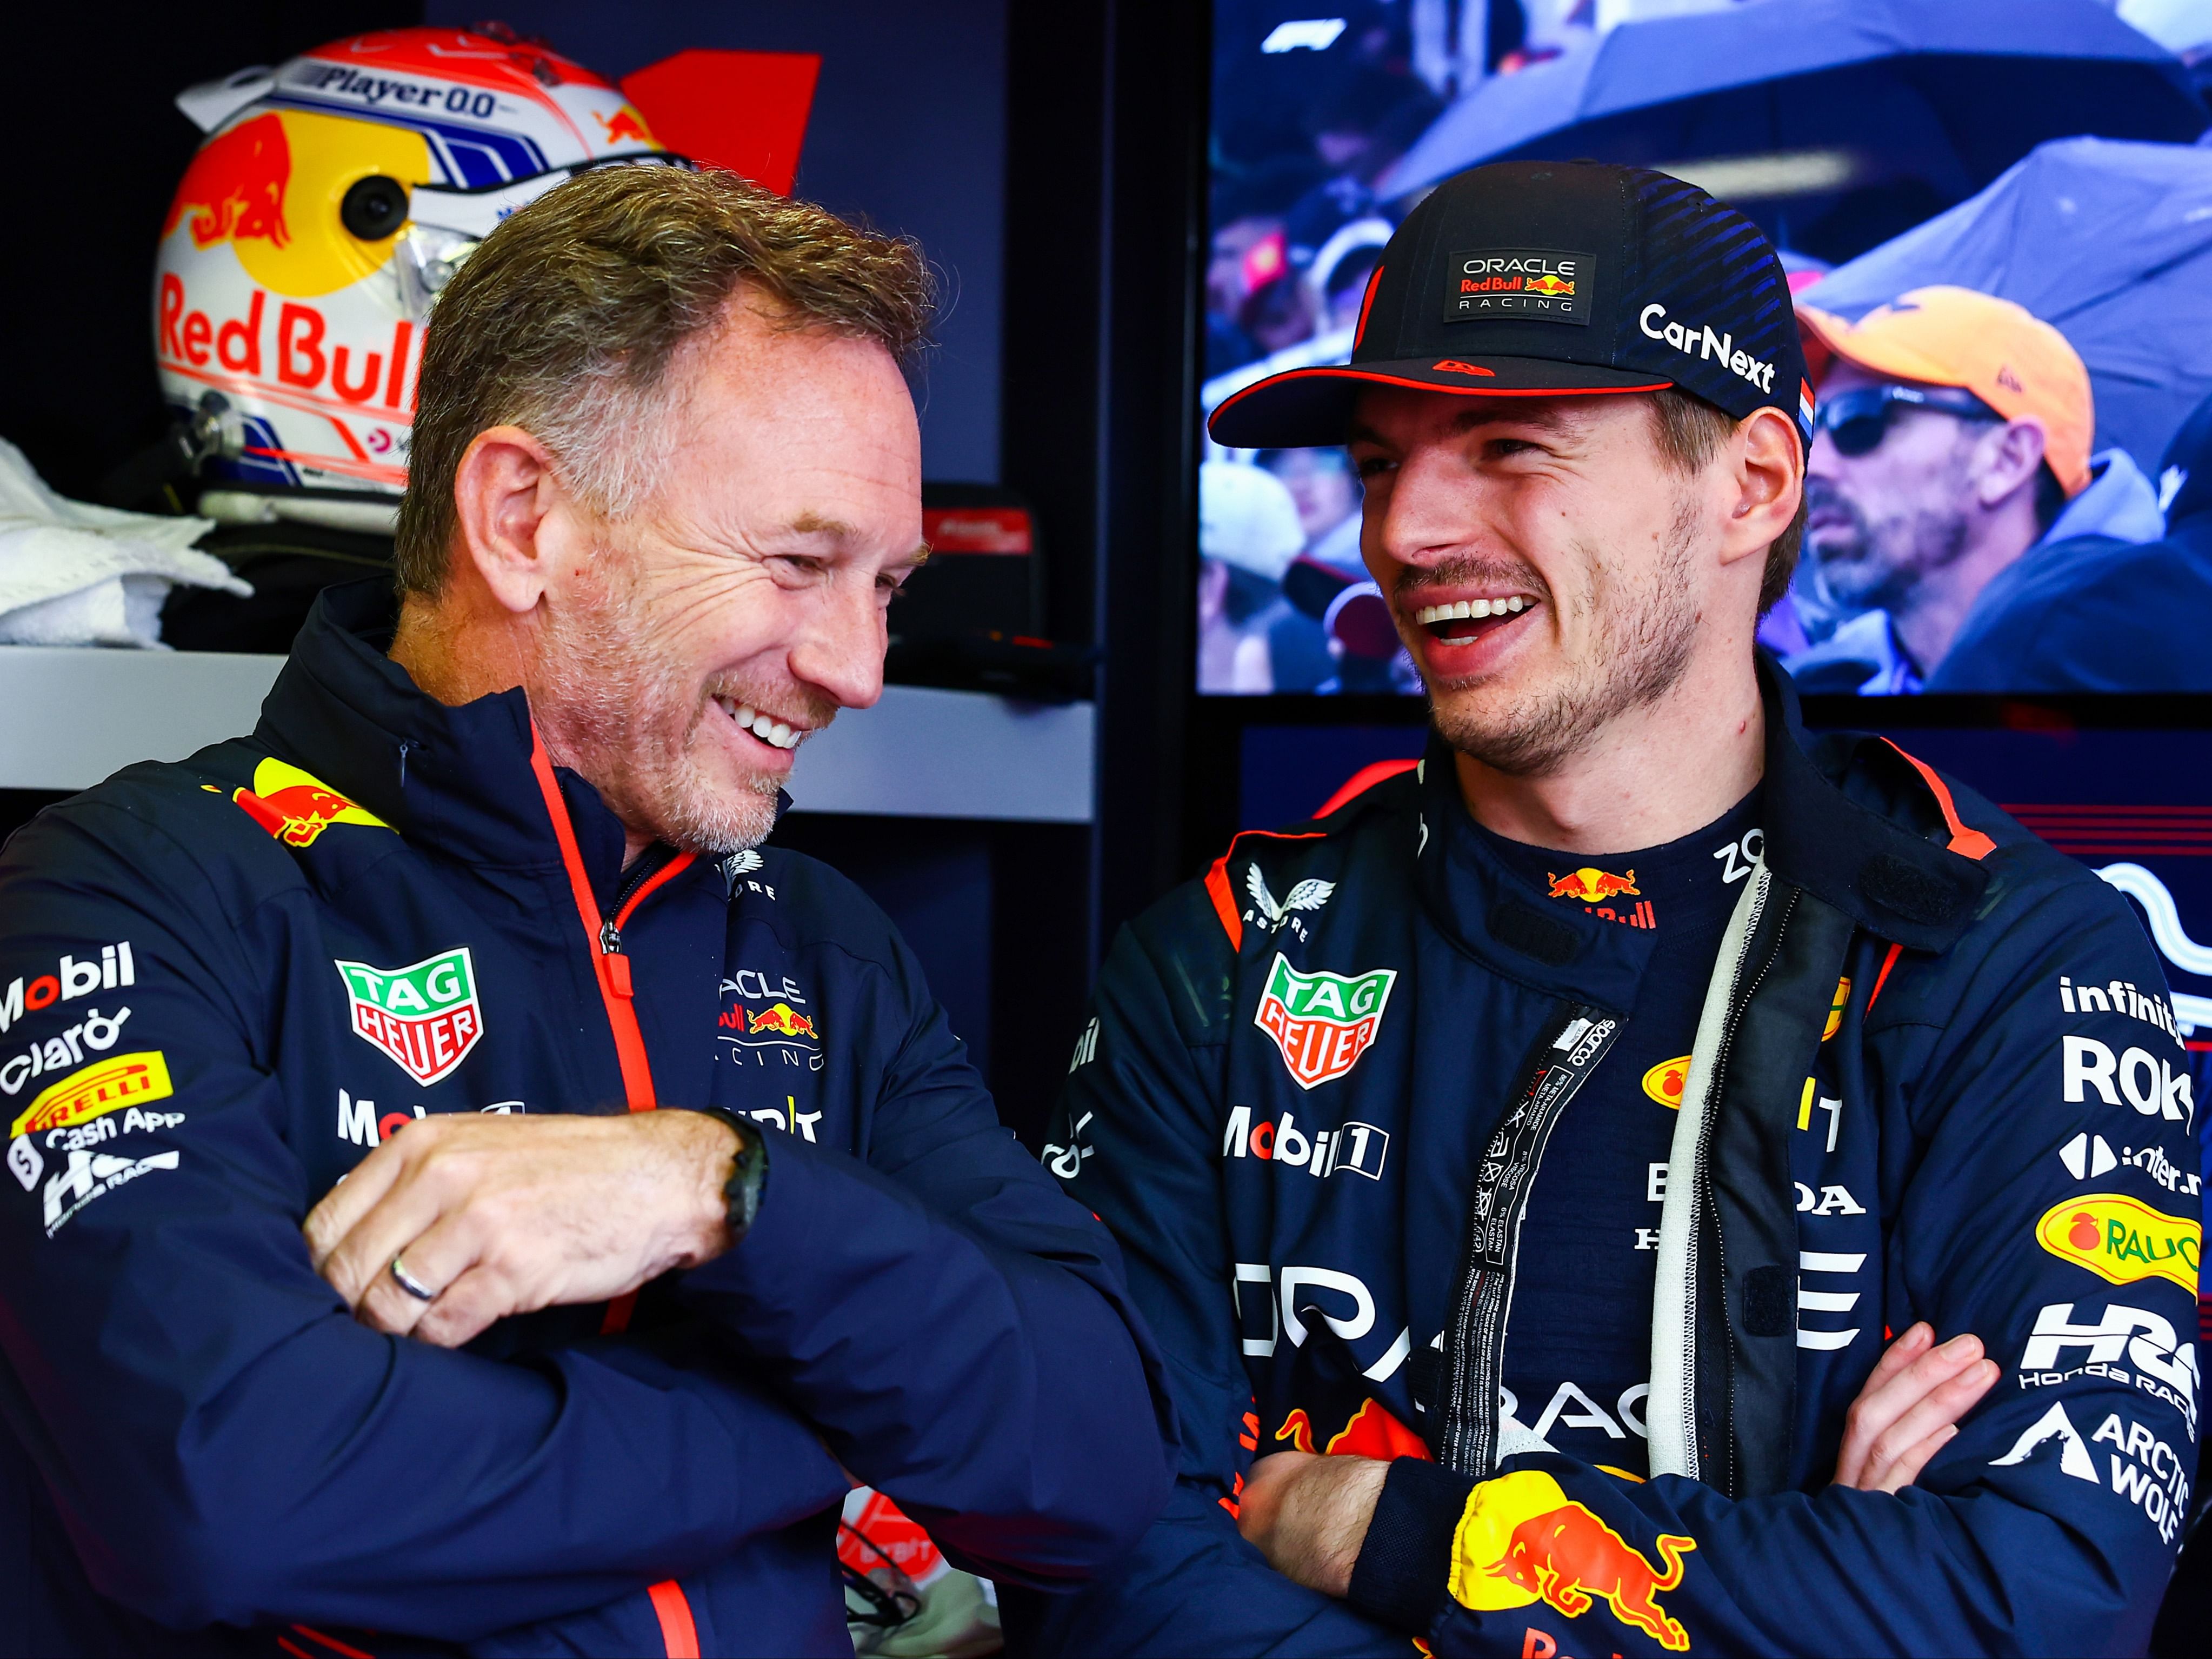 Christian Horner talks with Max Verstappen in the garage during qualifying ahead of the 2023 F1 Australian Grand Prix (Photo by Mark Thompson/Getty Images)